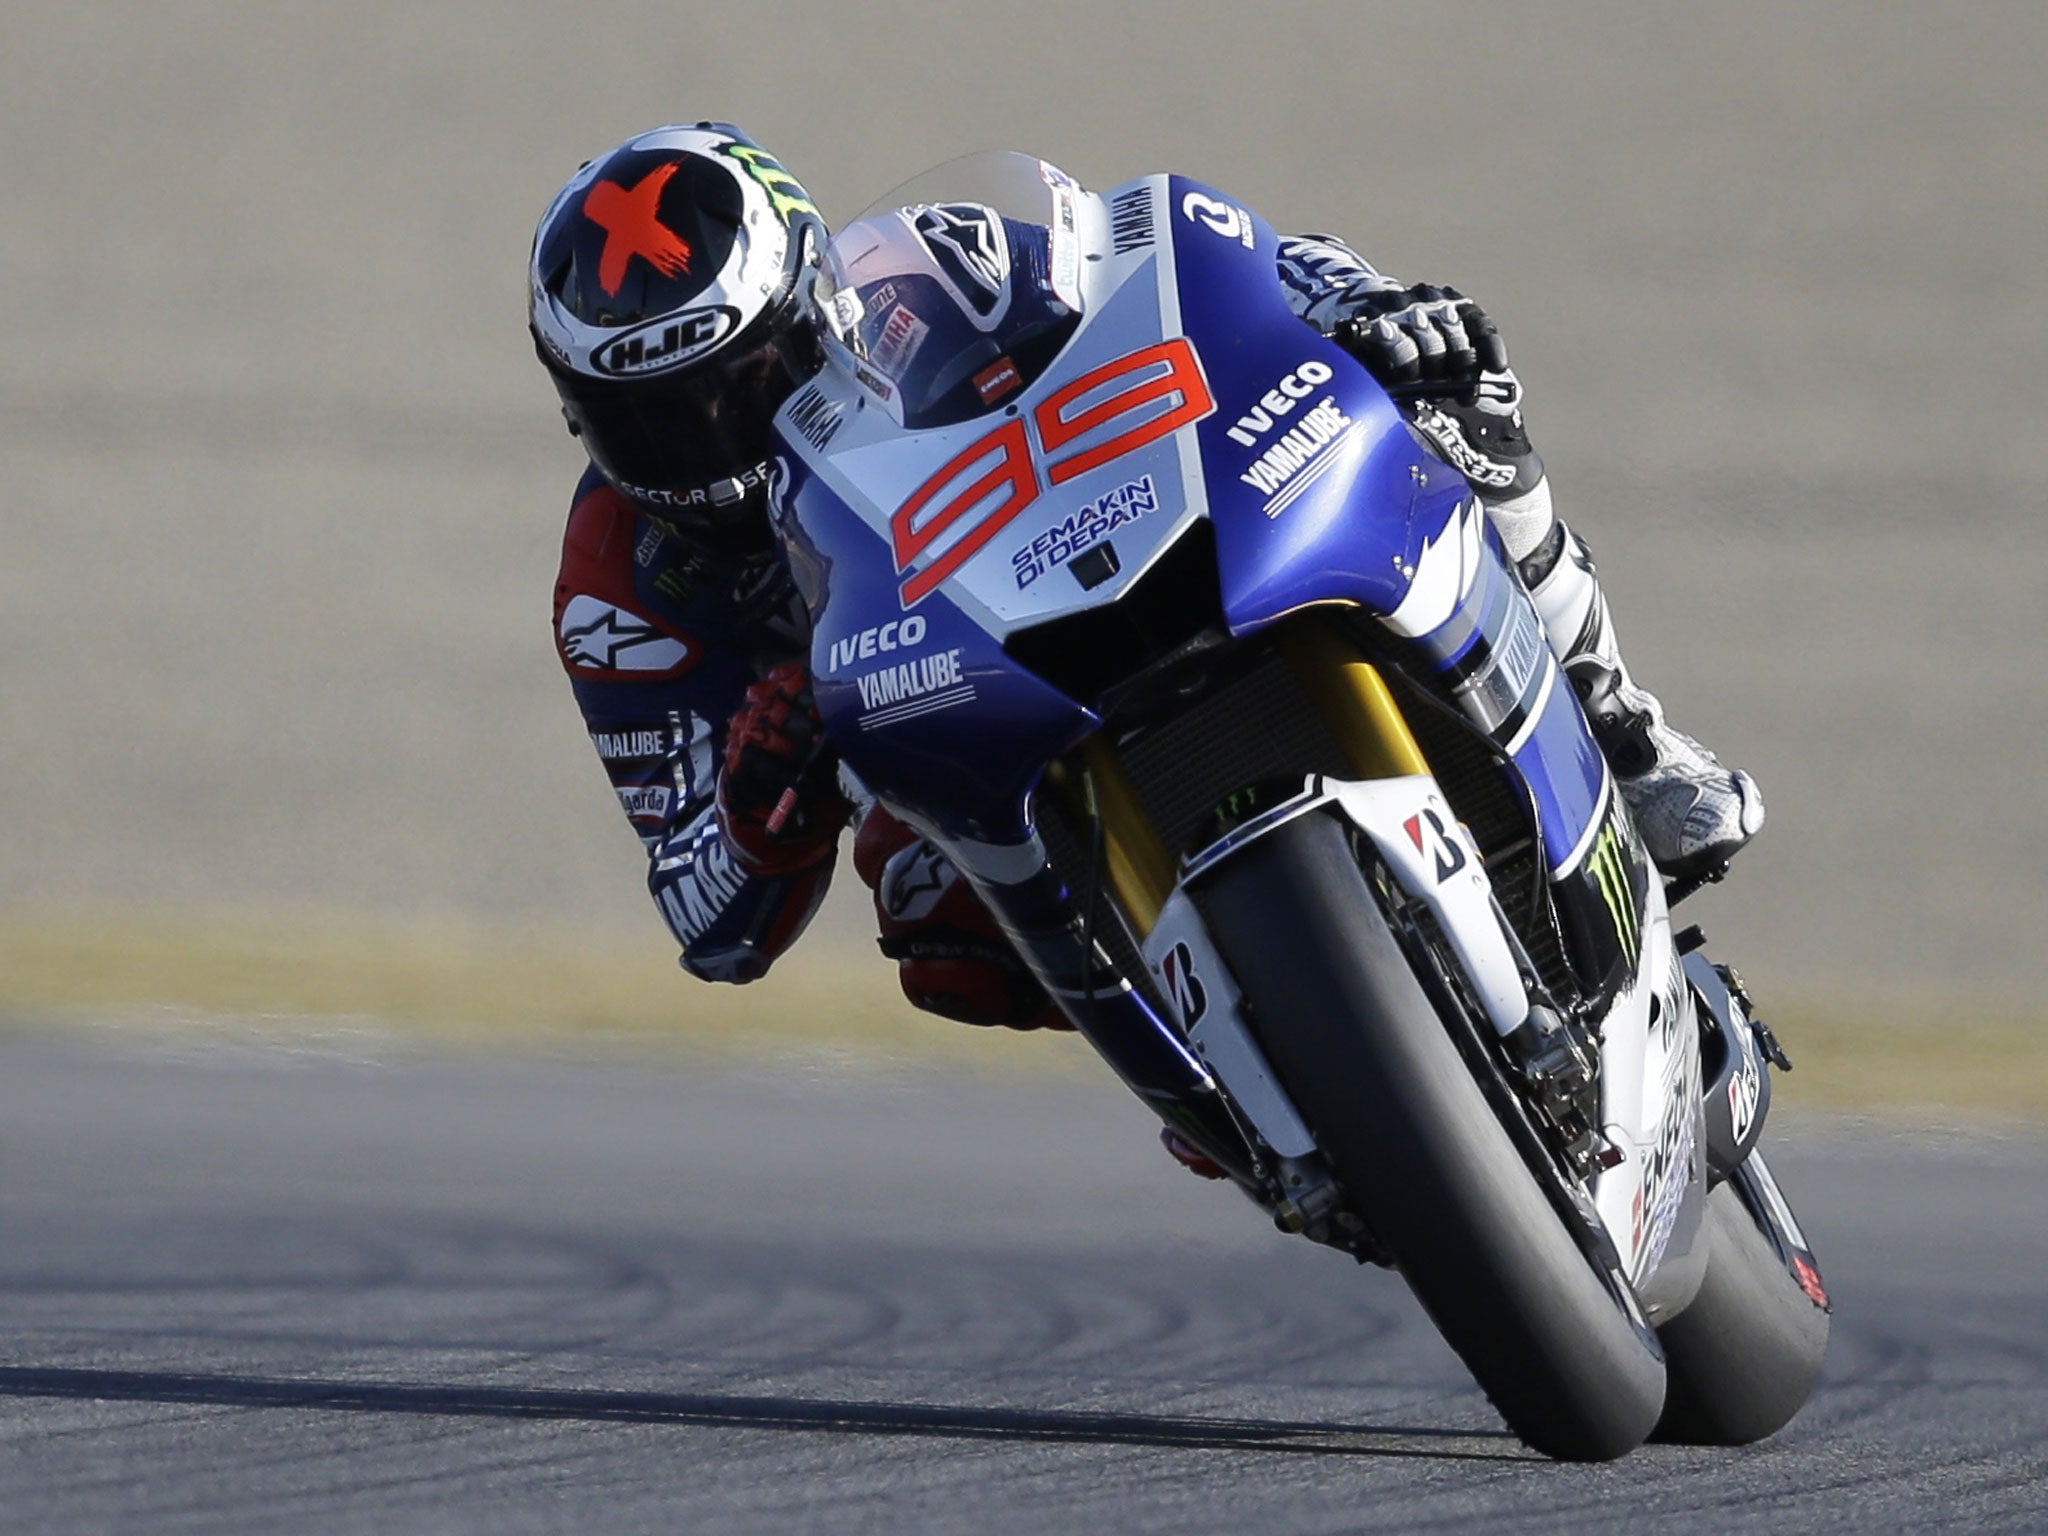 Jorge Lorenzo led from start to finish in the Japan Grand Prix